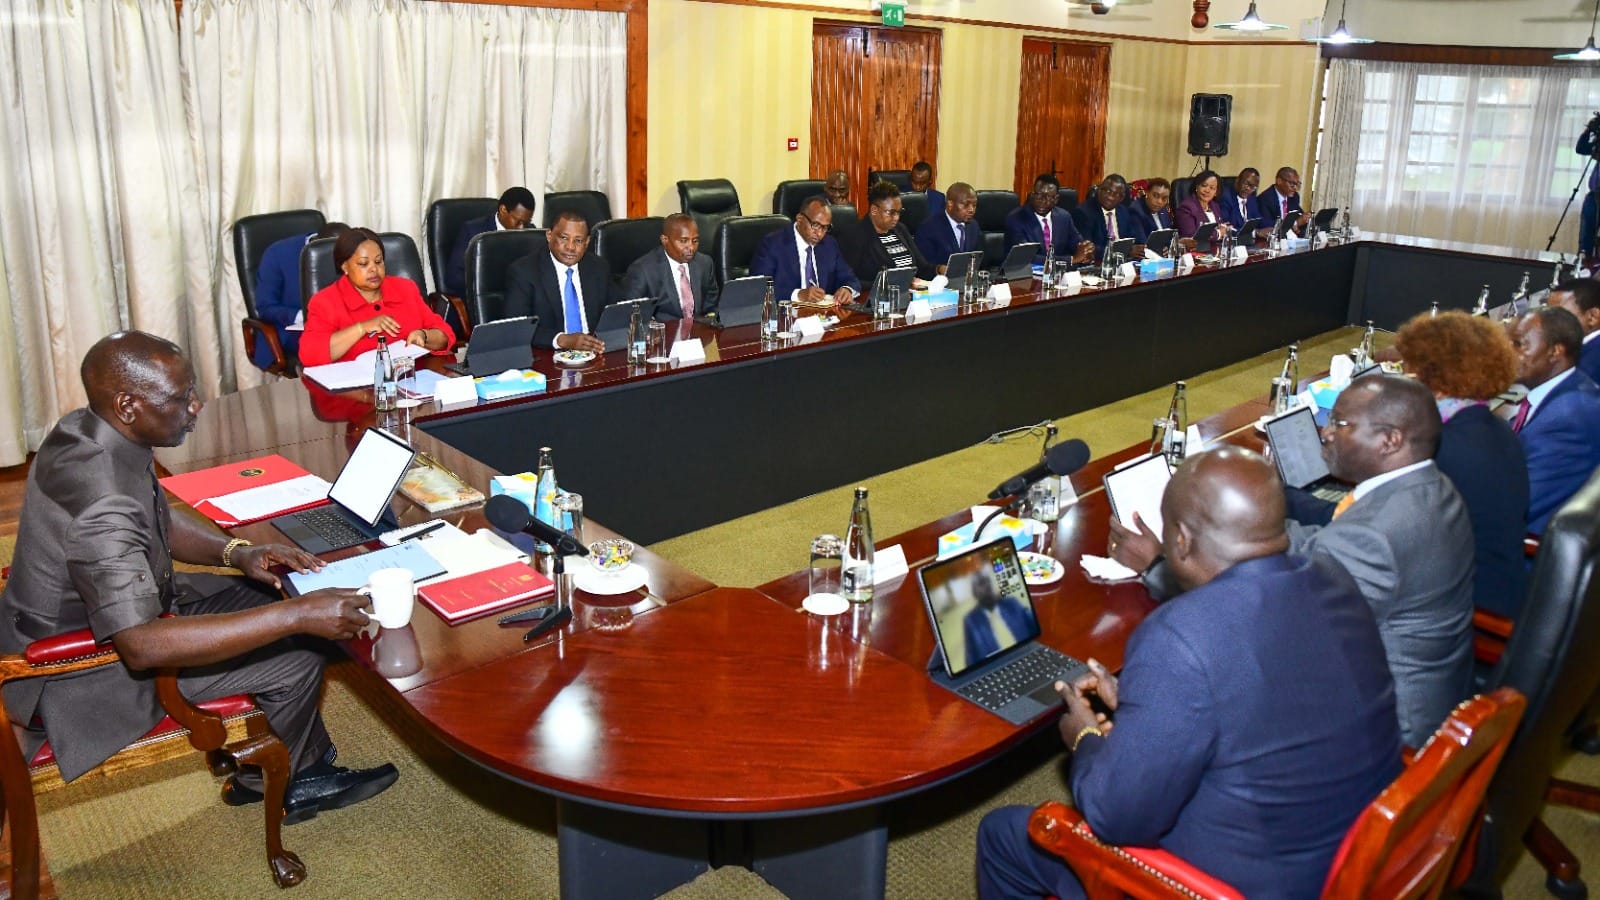 File image of President William Ruto chairing a Cabinet Meeting at Sagana State Lodge.